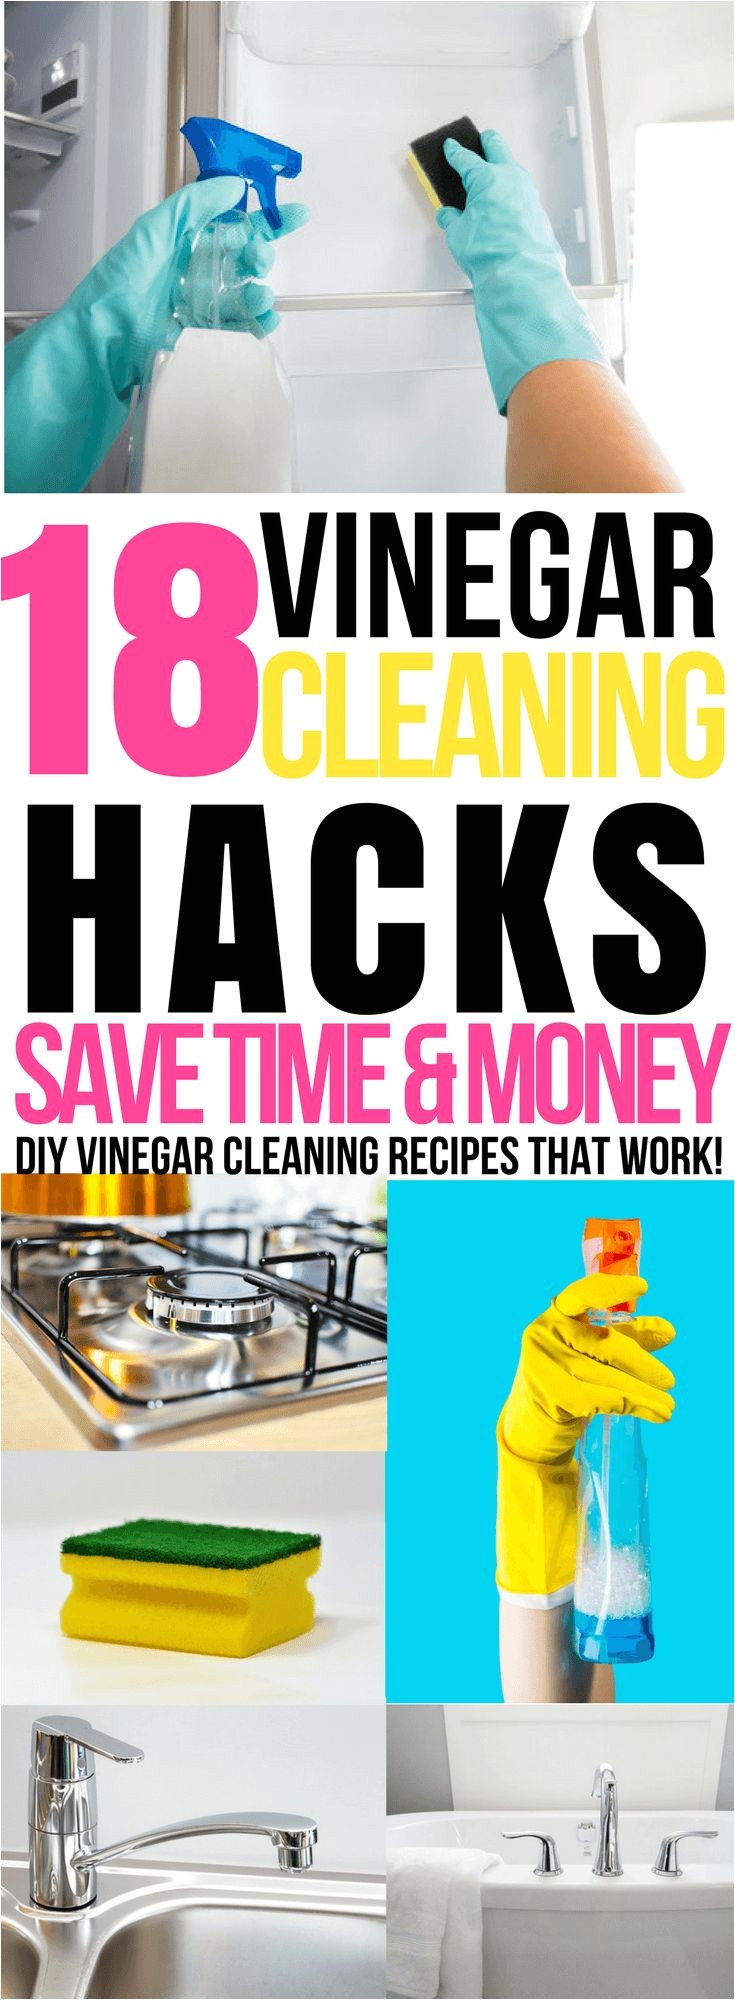 18 cleaning hacks that ll make you change the way you look at vinegar forever